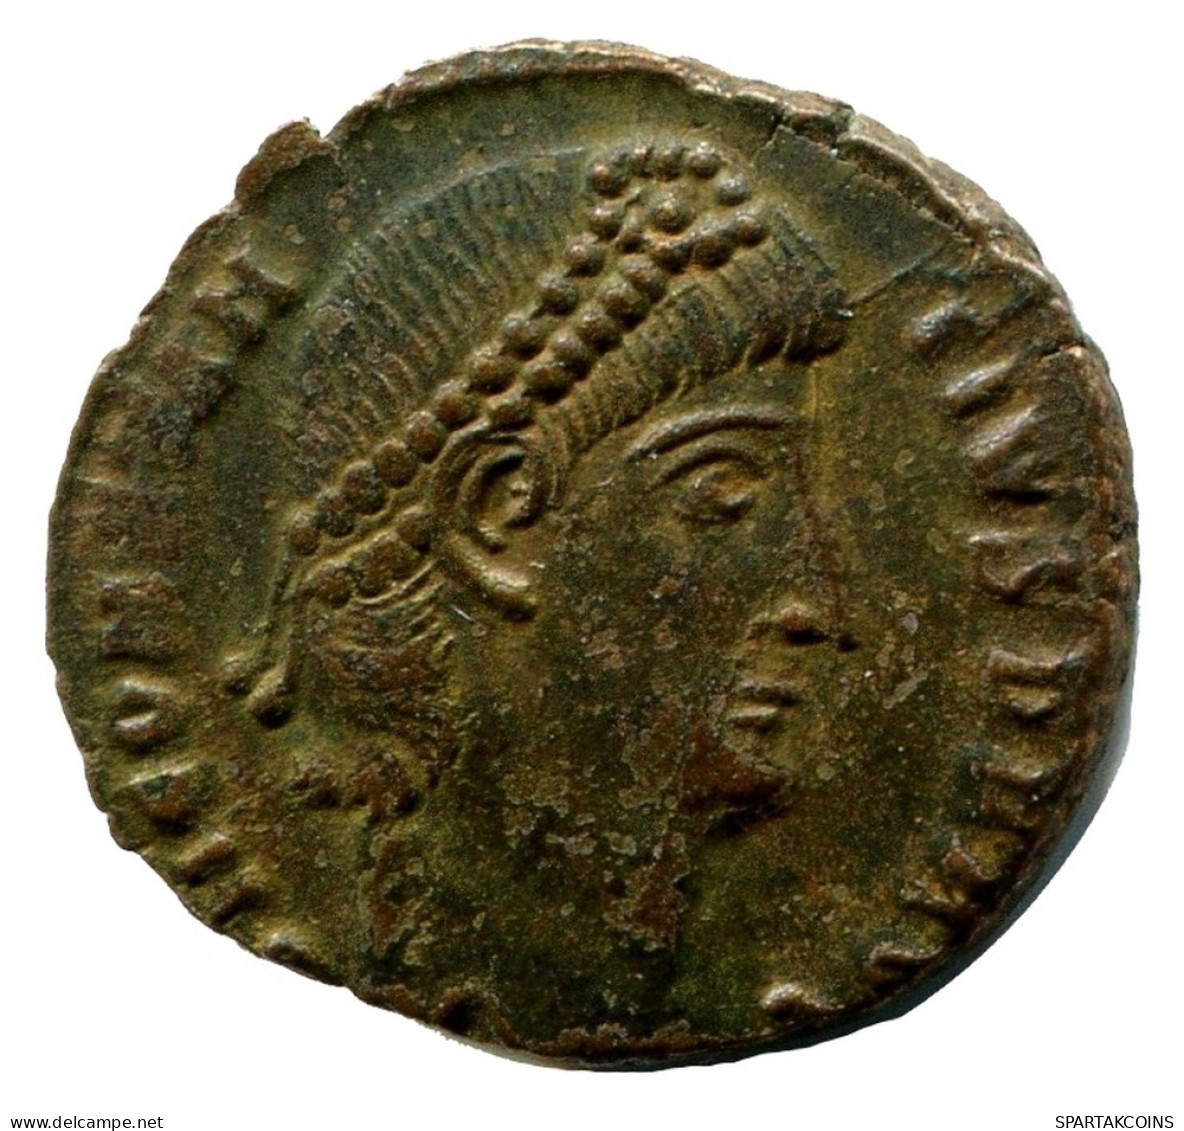 CONSTANTIUS II MINTED IN ANTIOCH FOUND IN IHNASYAH HOARD EGYPT #ANC11228.14.D.A - El Impero Christiano (307 / 363)